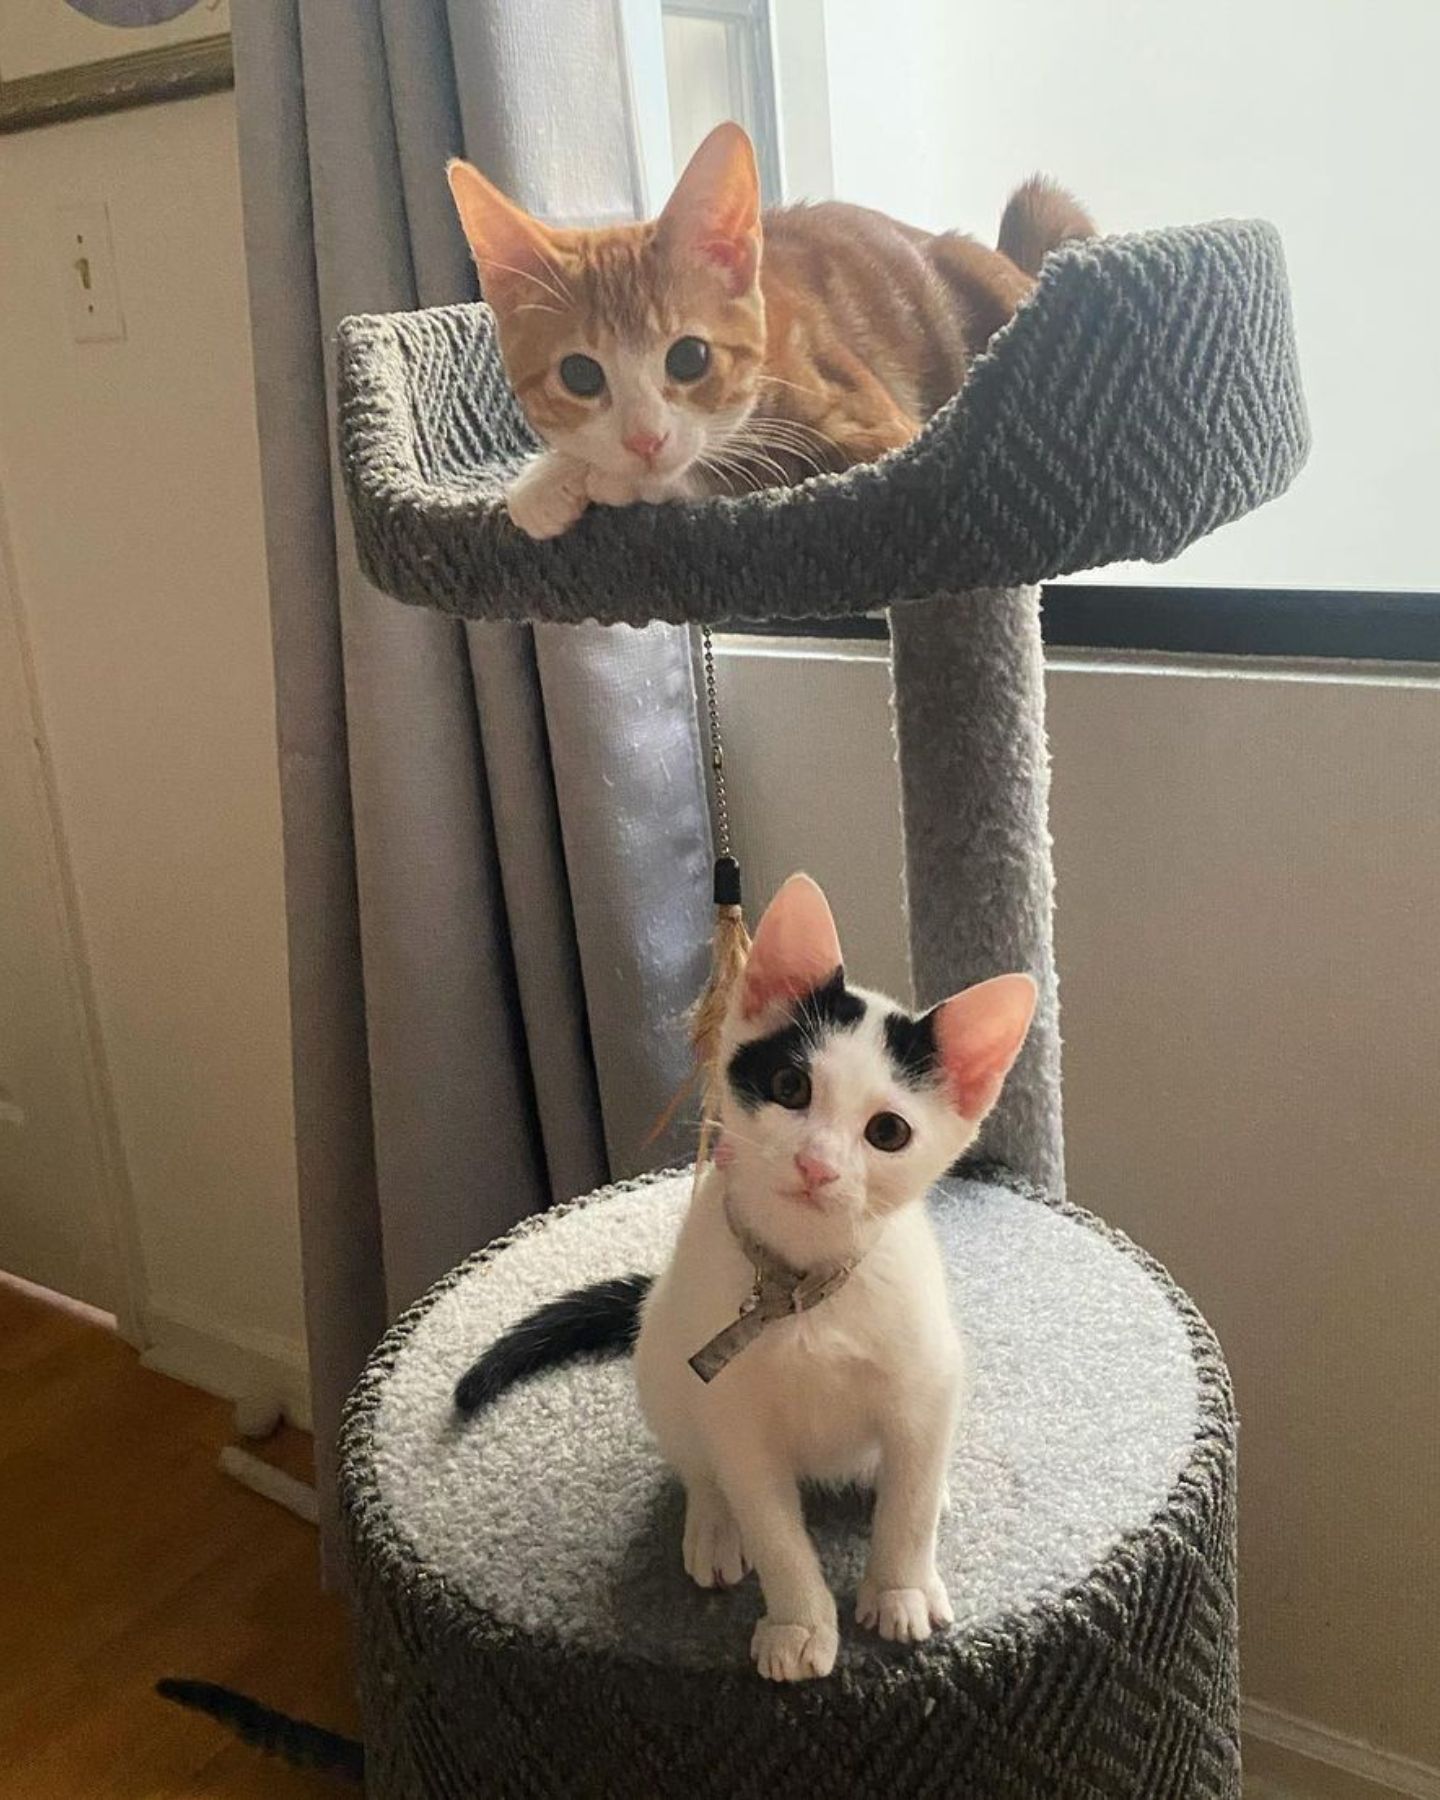 two cats on a cat tree